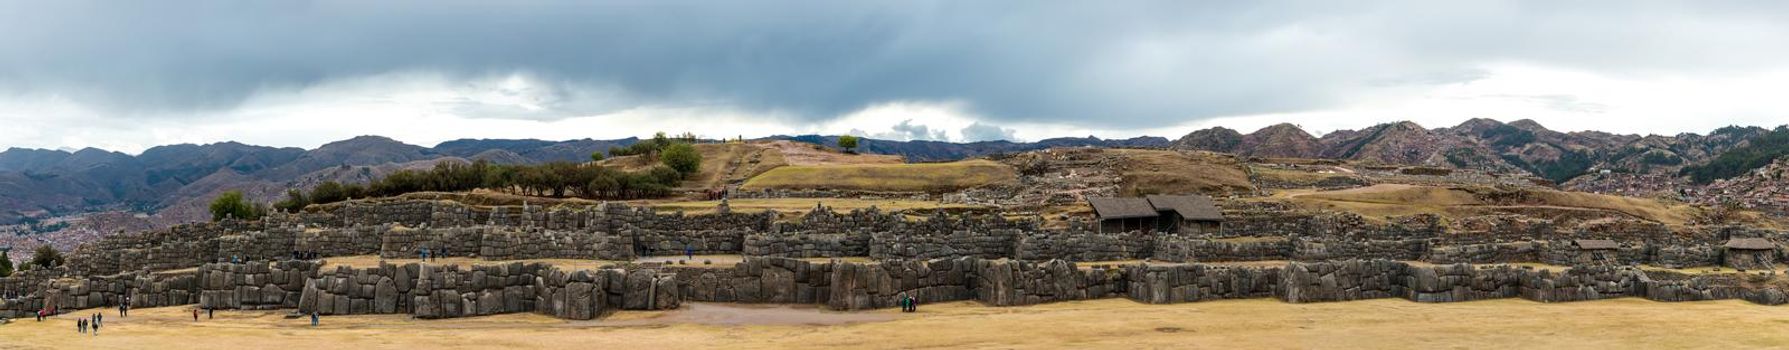 Saksaywaman, the ruined citadel on the northern outskirts of Cusco, Peru, the lost capital of Incan empire